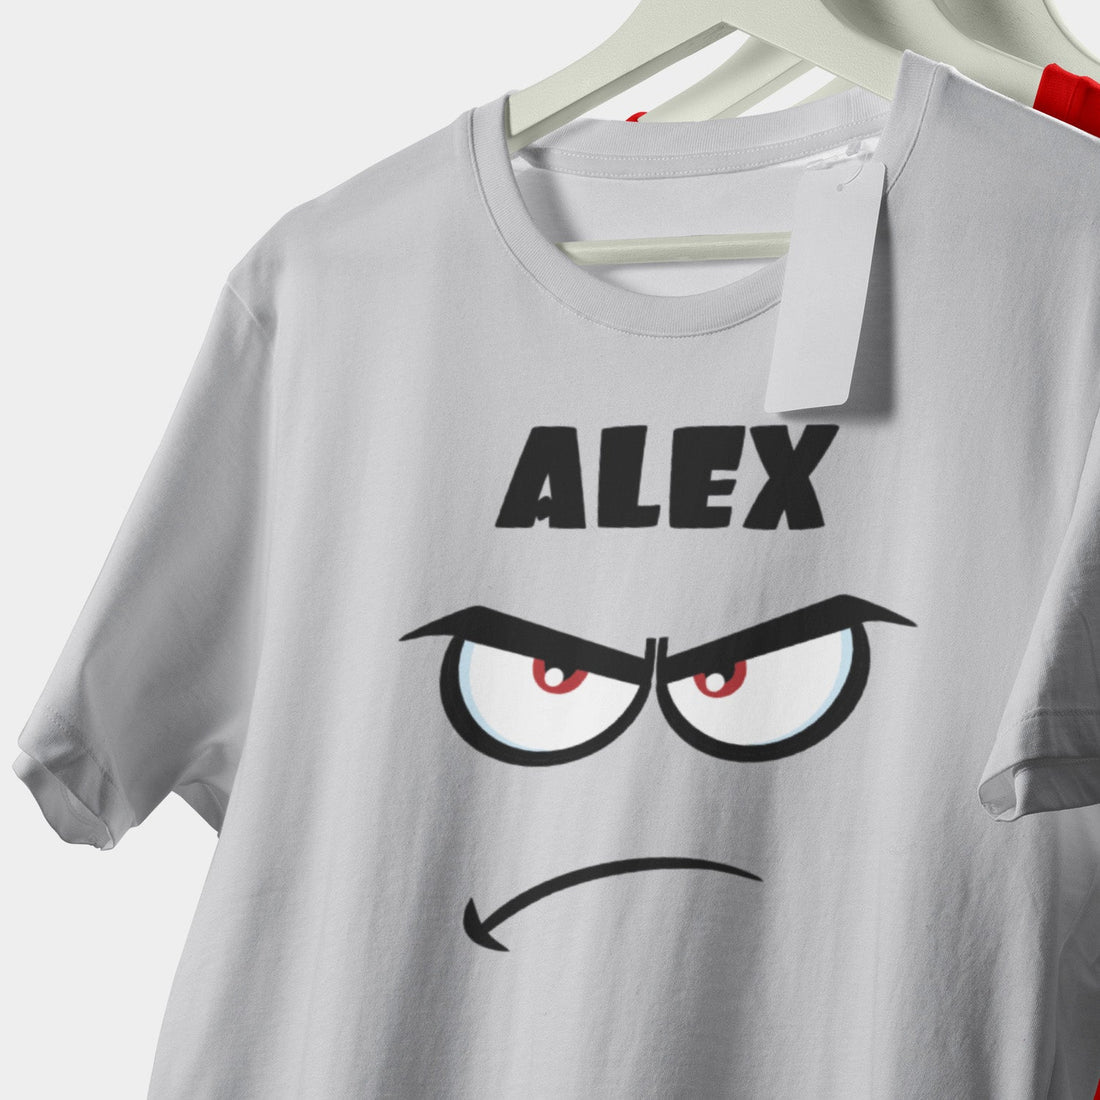 Personalisiertes T-Shirt Grimmiges Monster Mit Name